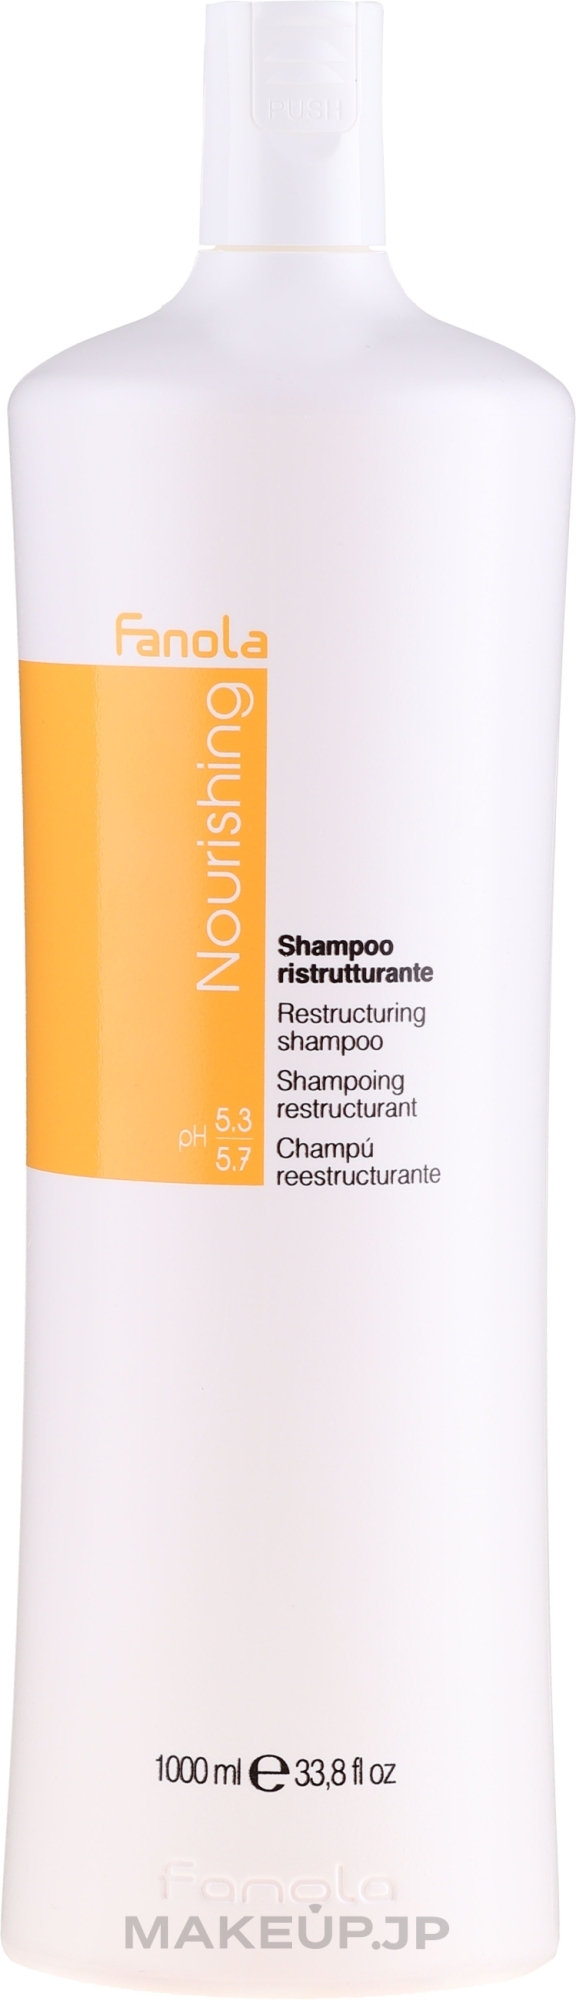 Restructuring Shampoo for Dry Hair - Fanola Restructuring Shampoo — photo 1000 ml